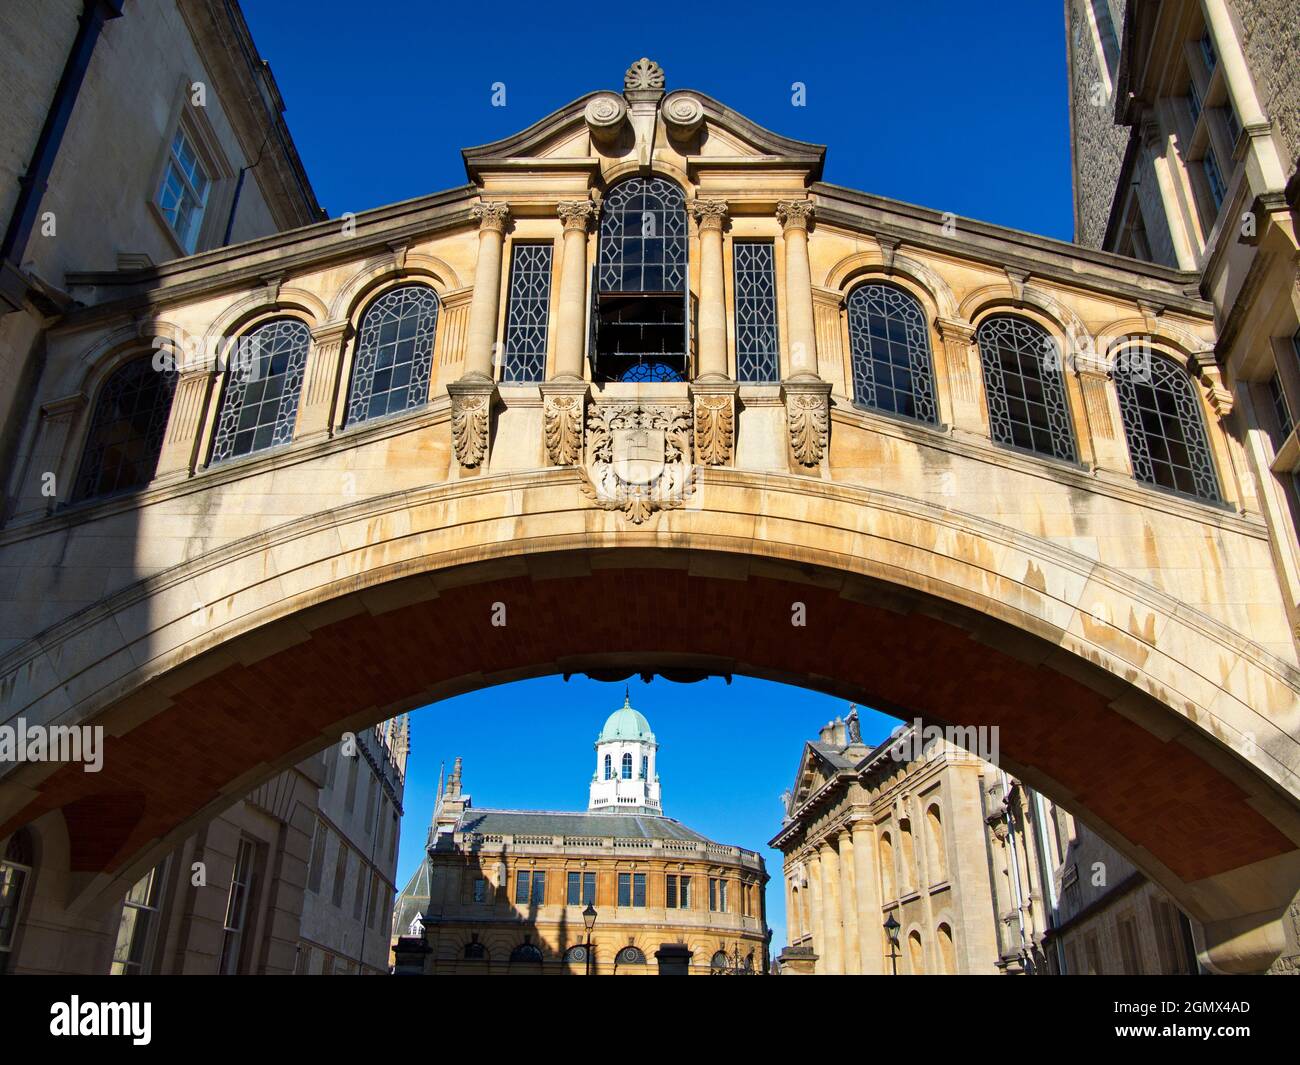 Oxford, England - 7 August 2020; One silhouetted person in view.  Linking two parts of Hertford College, Oxford, its landmark Hertford Bridge - often Stock Photo